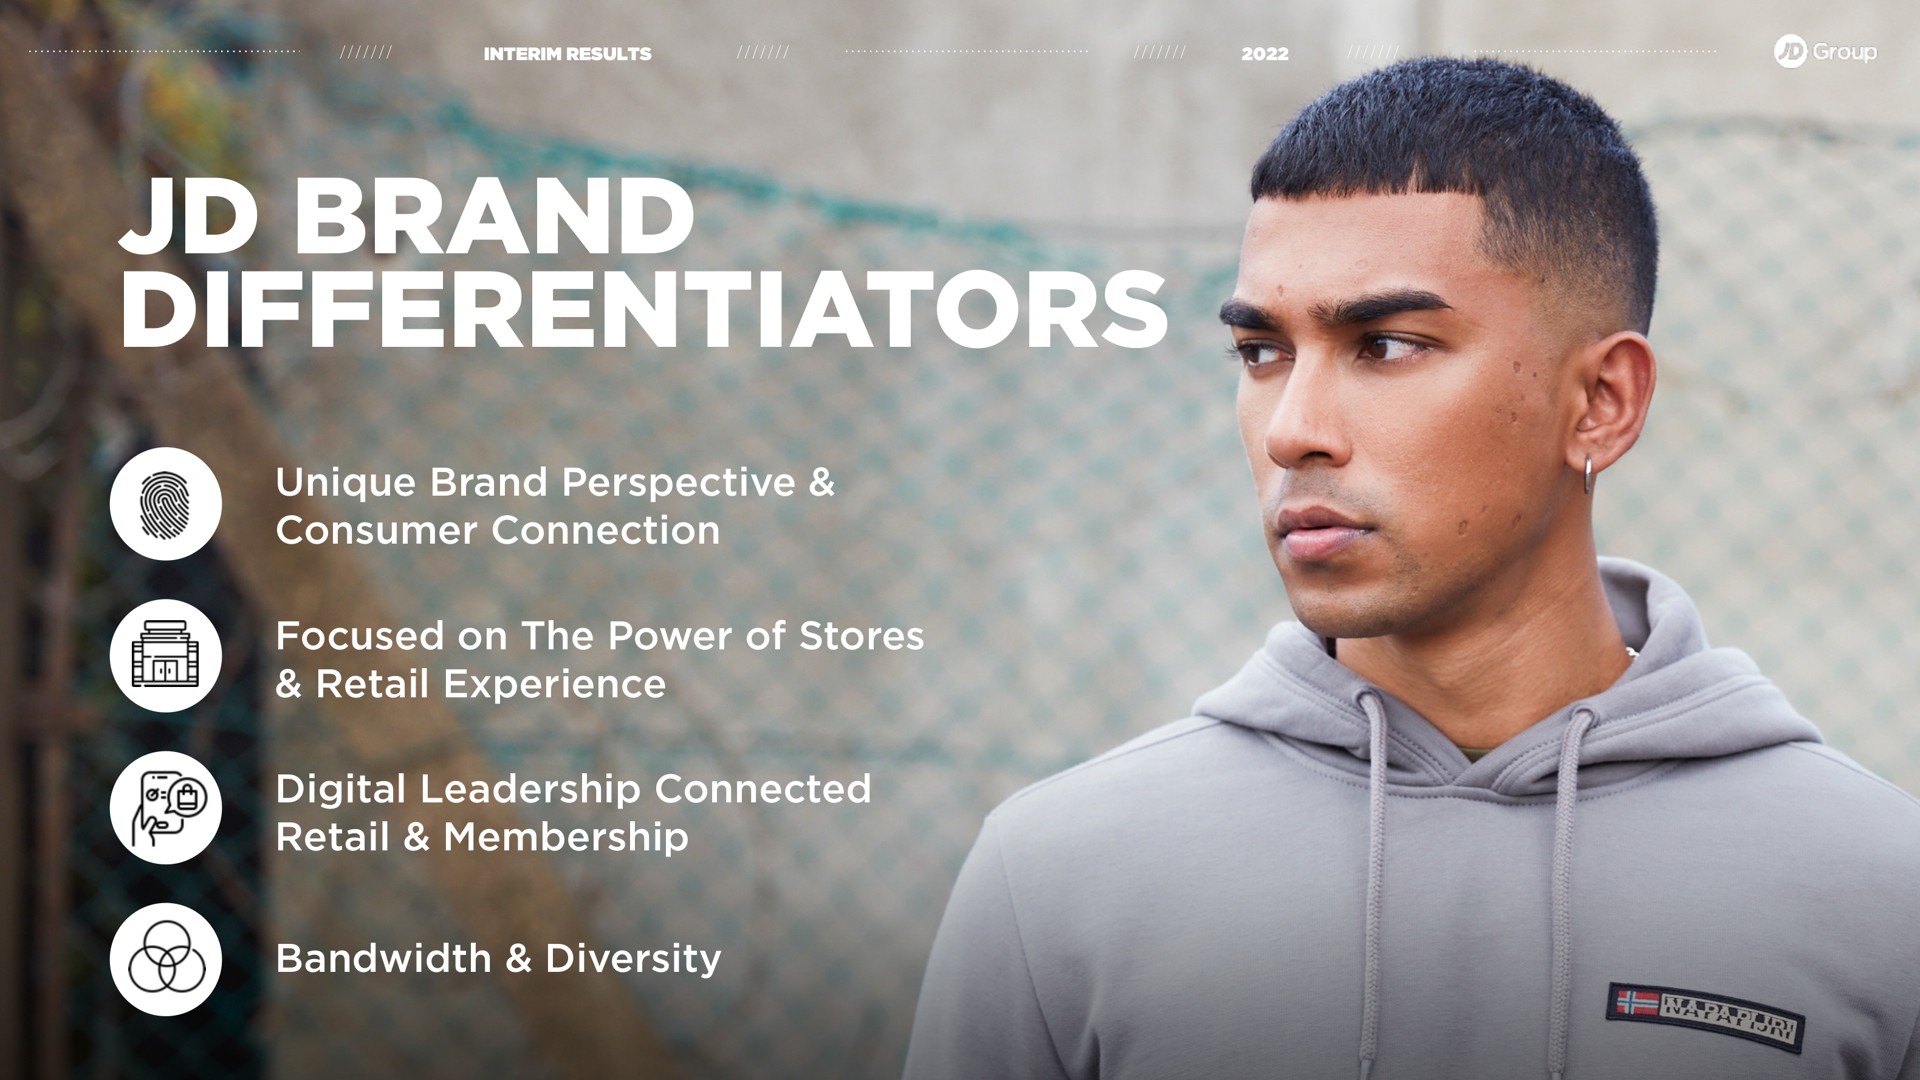 brand differentiators unique brand perspective consumer connection focused on the power of stores retail experience digital leadership connected retail membership diversity pet ail mete | JD Sports